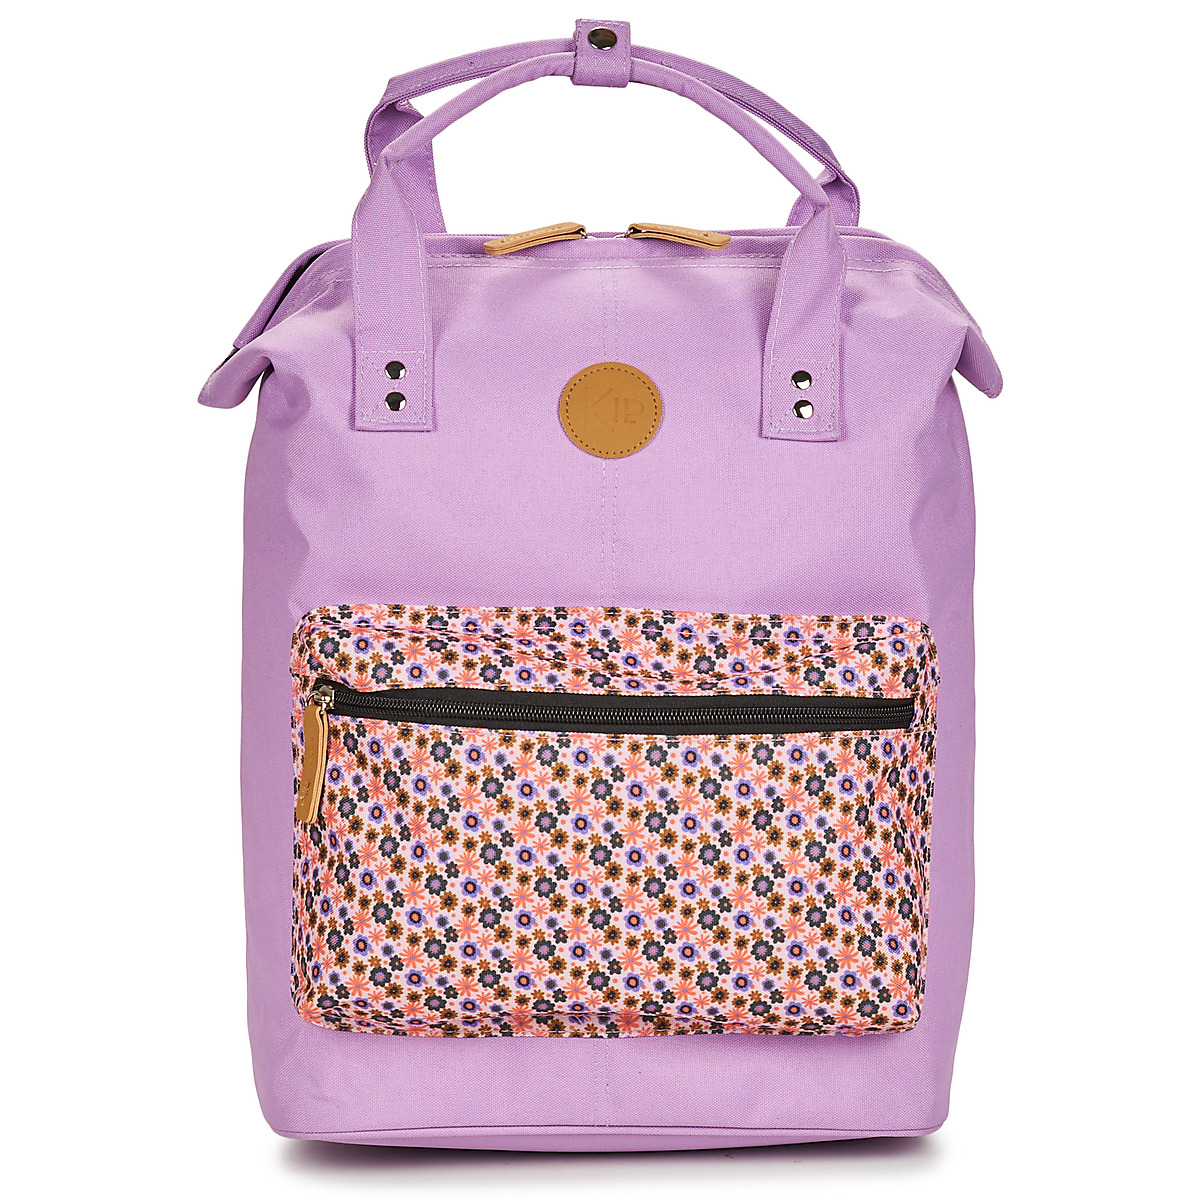 Bags Girl Satchels Back To School COLORFUL Pink